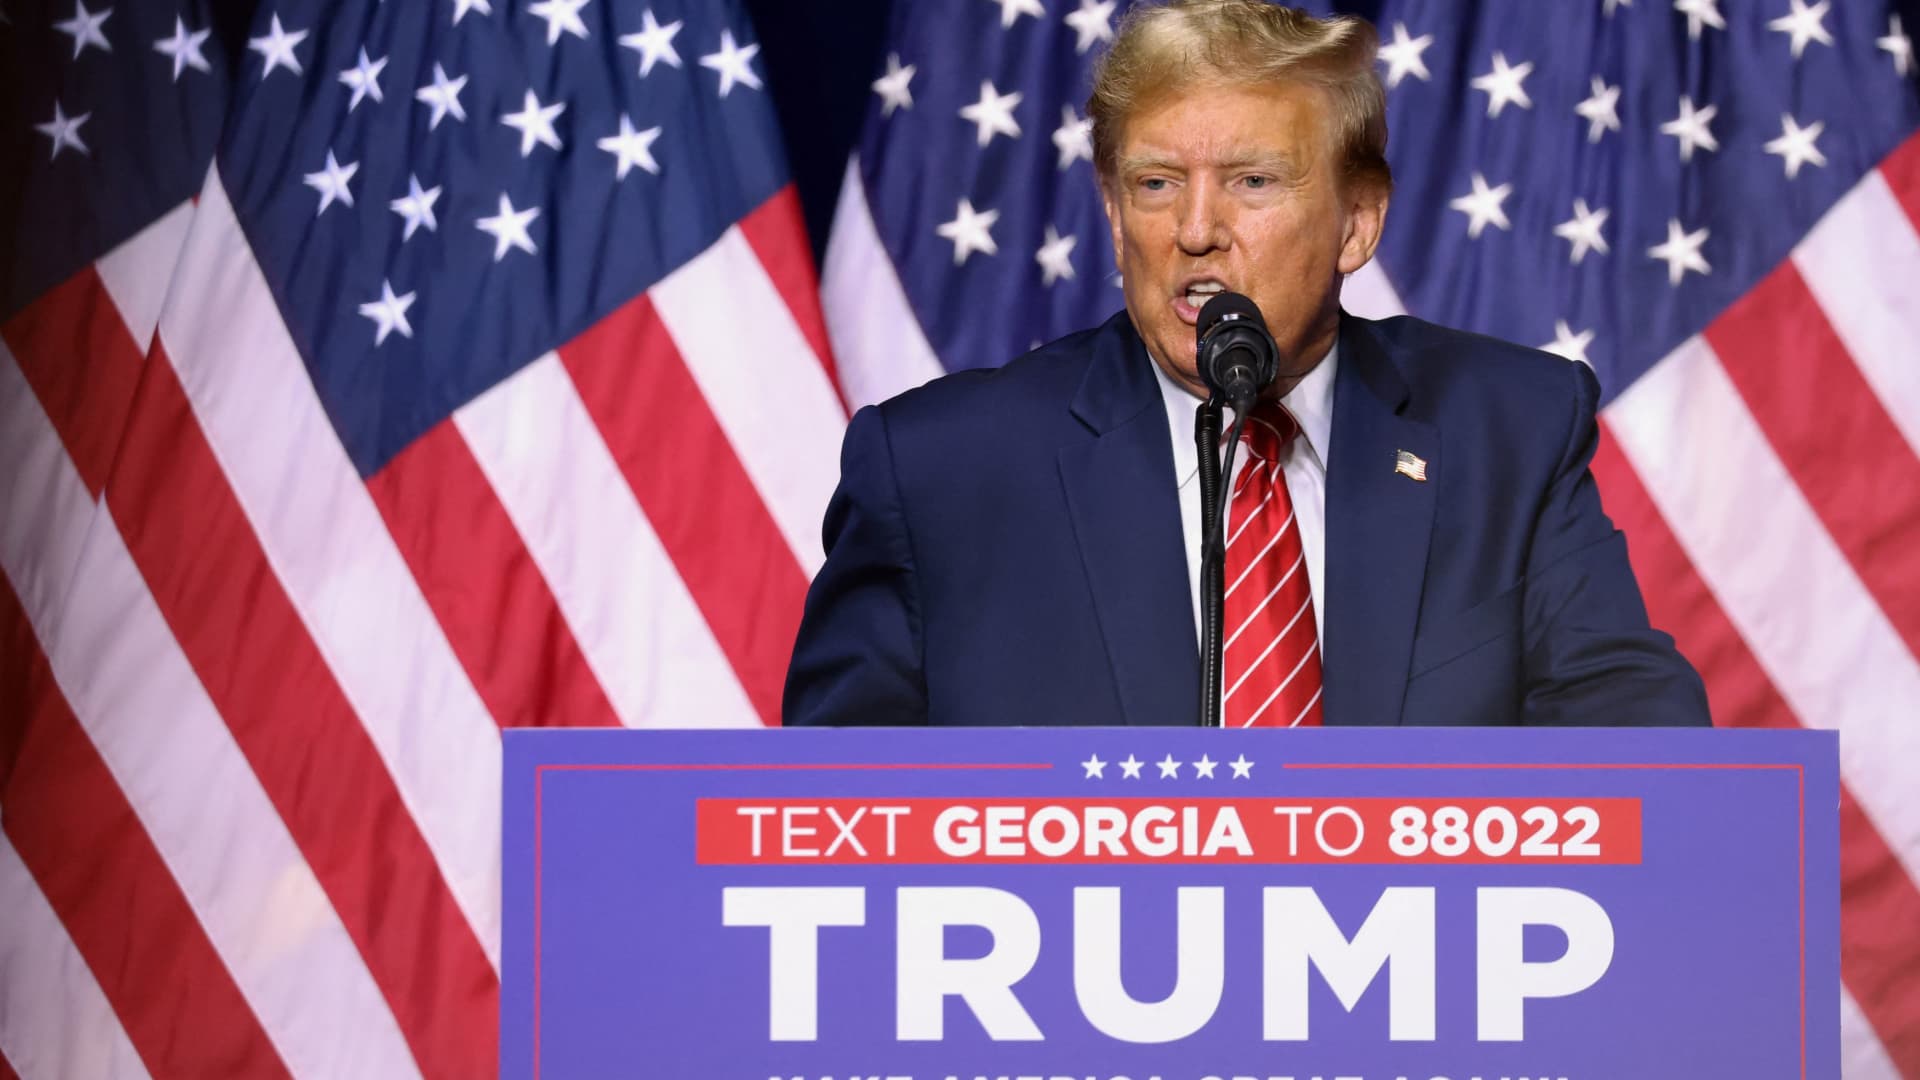 Republican presidential candidate and former U.S. President Donald Trump speaks during a campaign rally at the Forum River Center in Rome, Georgia, U.S. March 9, 2024. 